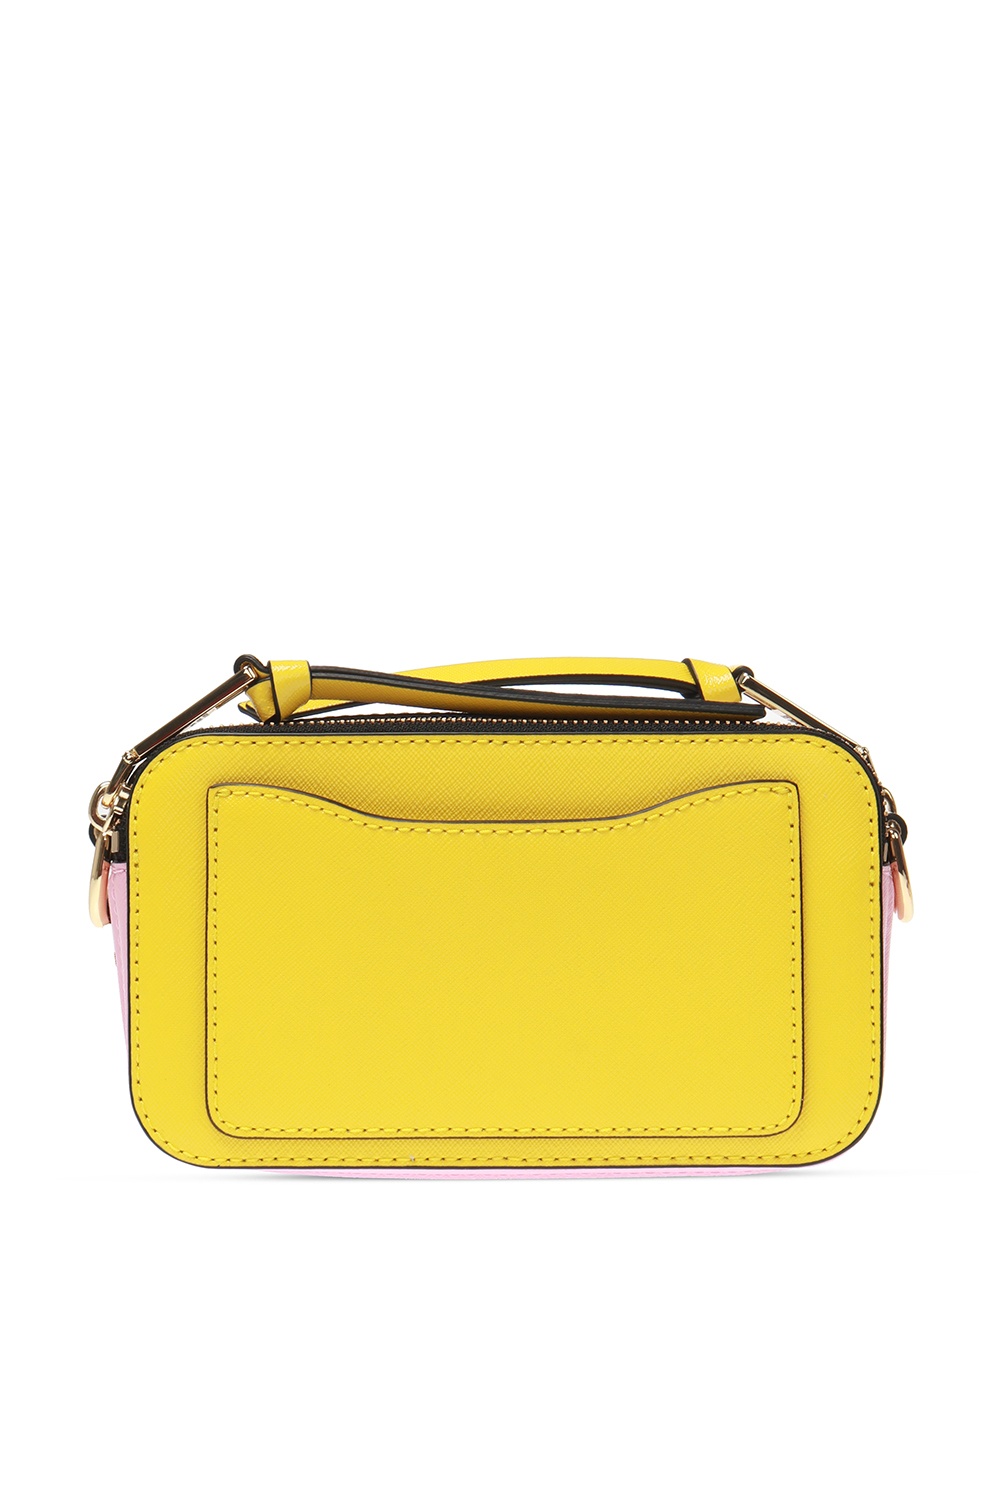 Marc Jacobs Yellow & Pink 'The Snapshot' Shoulder Bag - ShopStyle